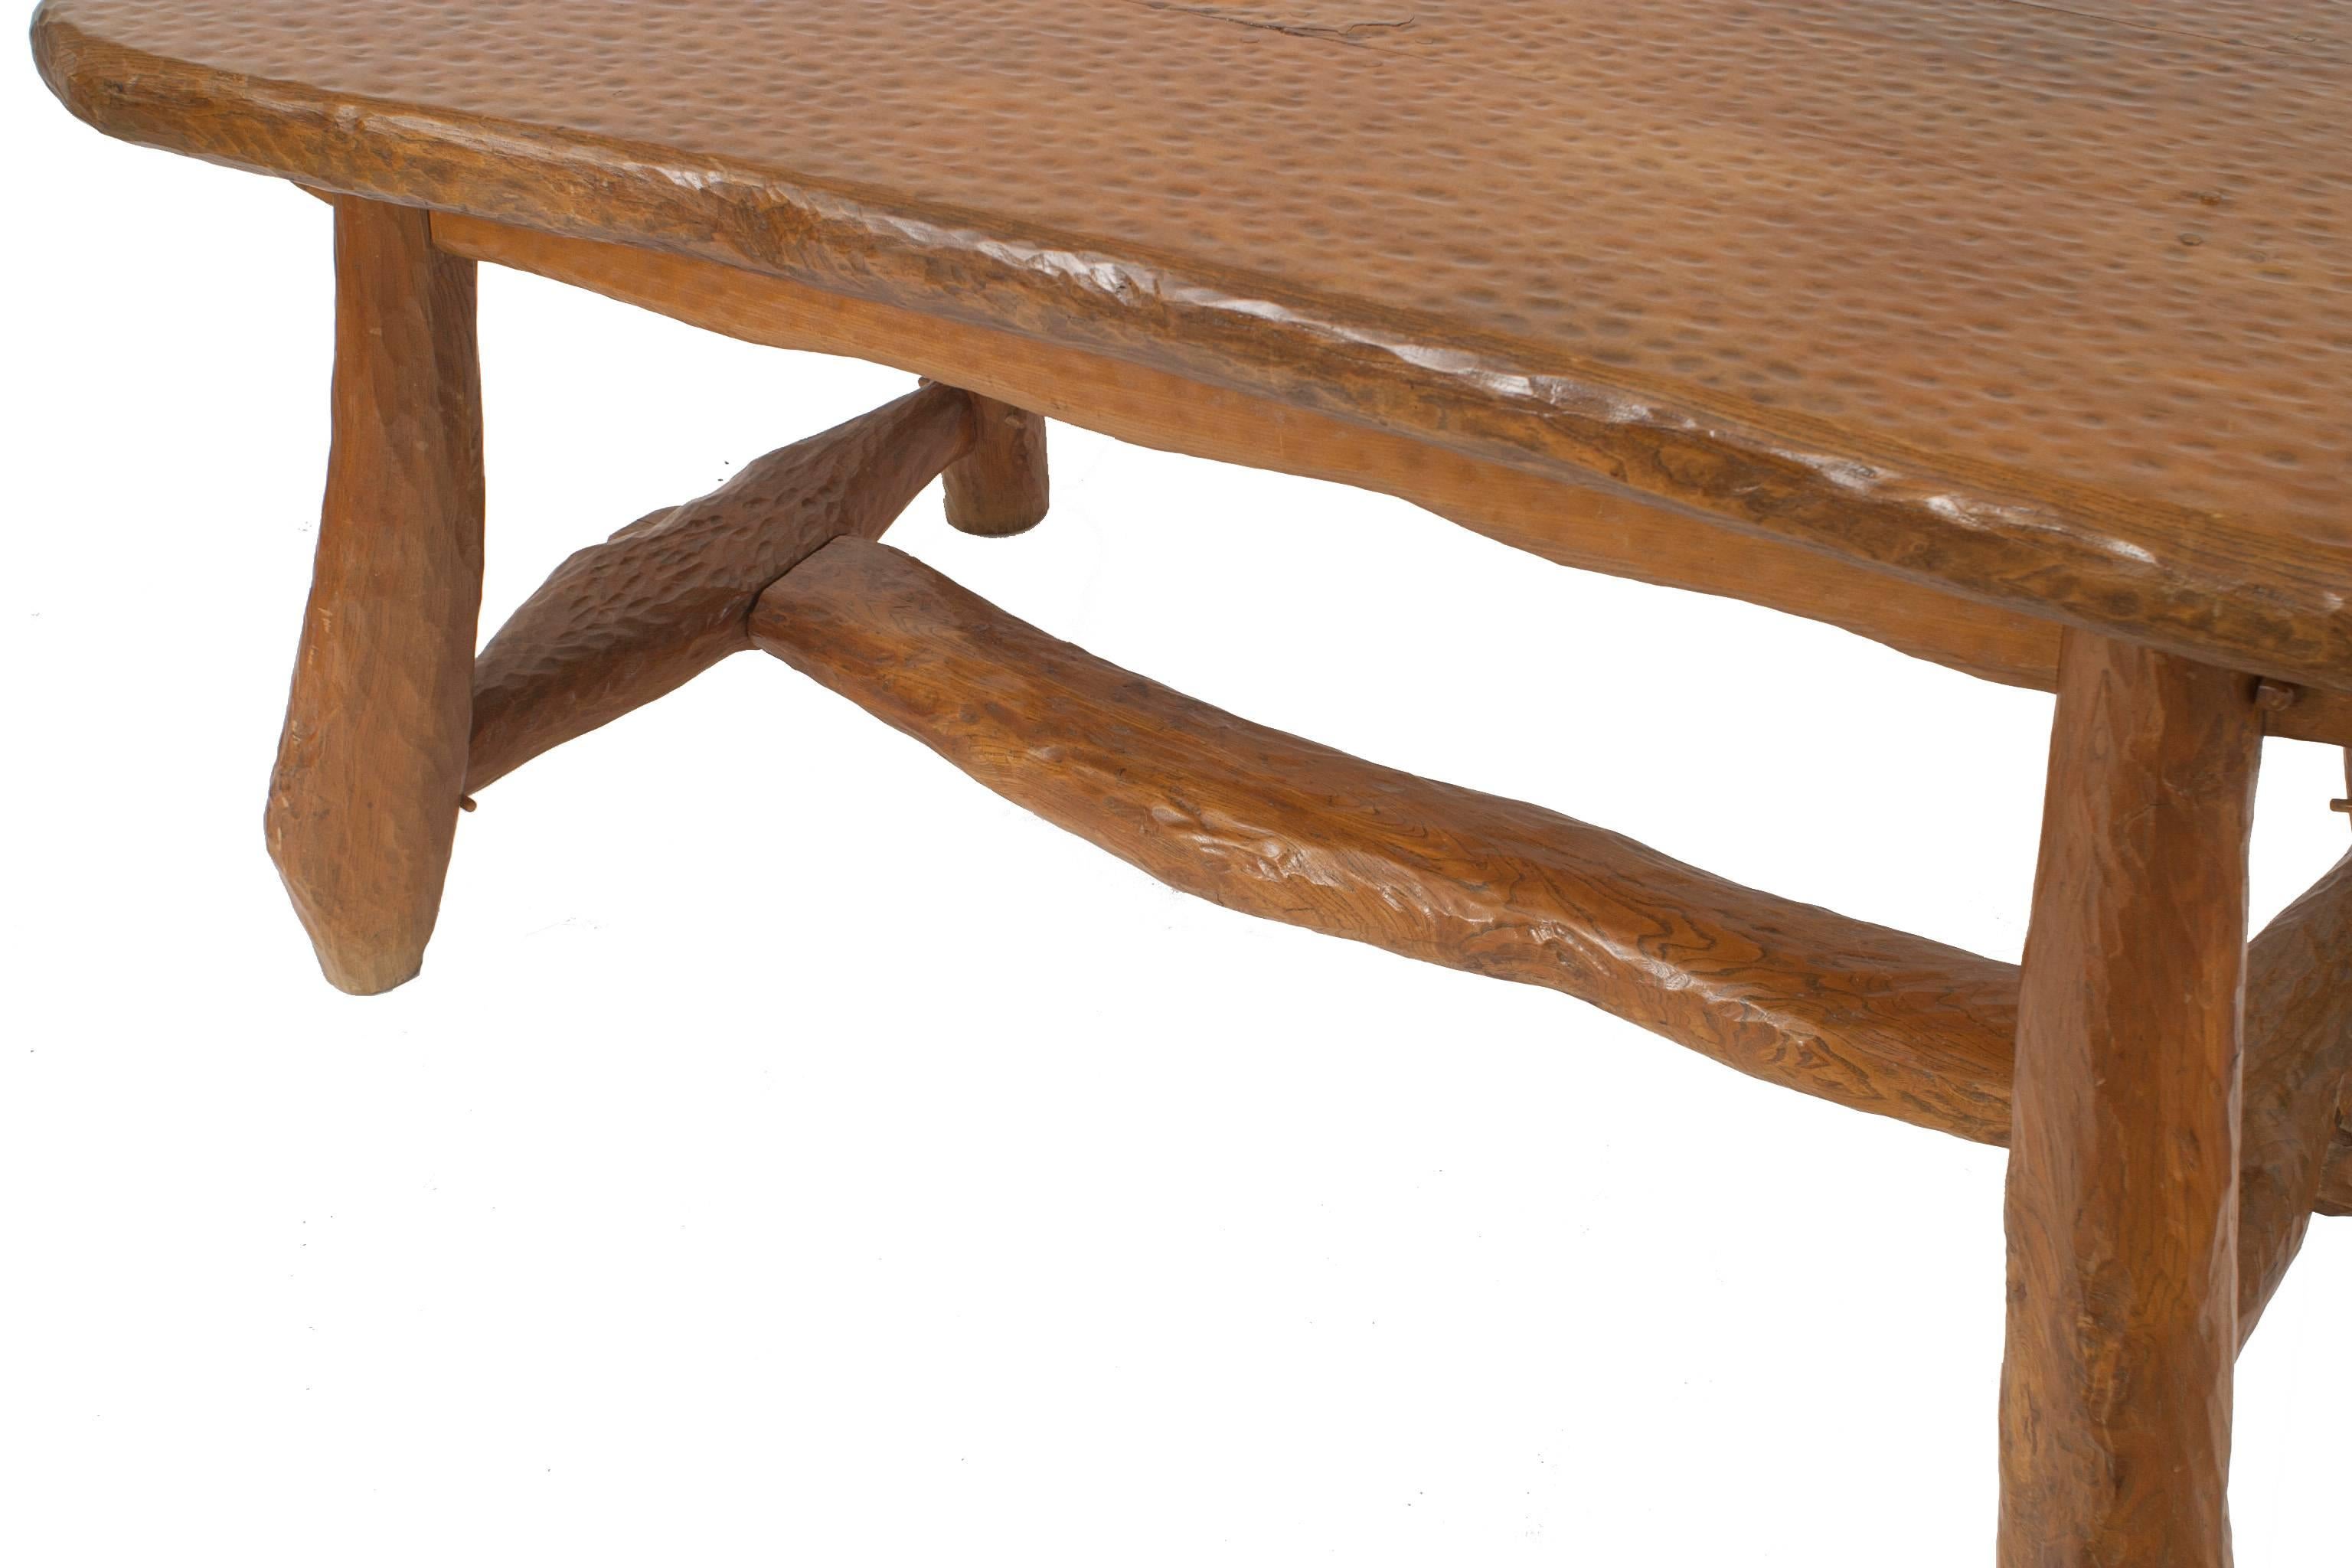 Rustic Adirondack-style (French 1940s) chipped pine rectangular dining table with a stretcher (Related Items: 060975, 060977, 060979)
